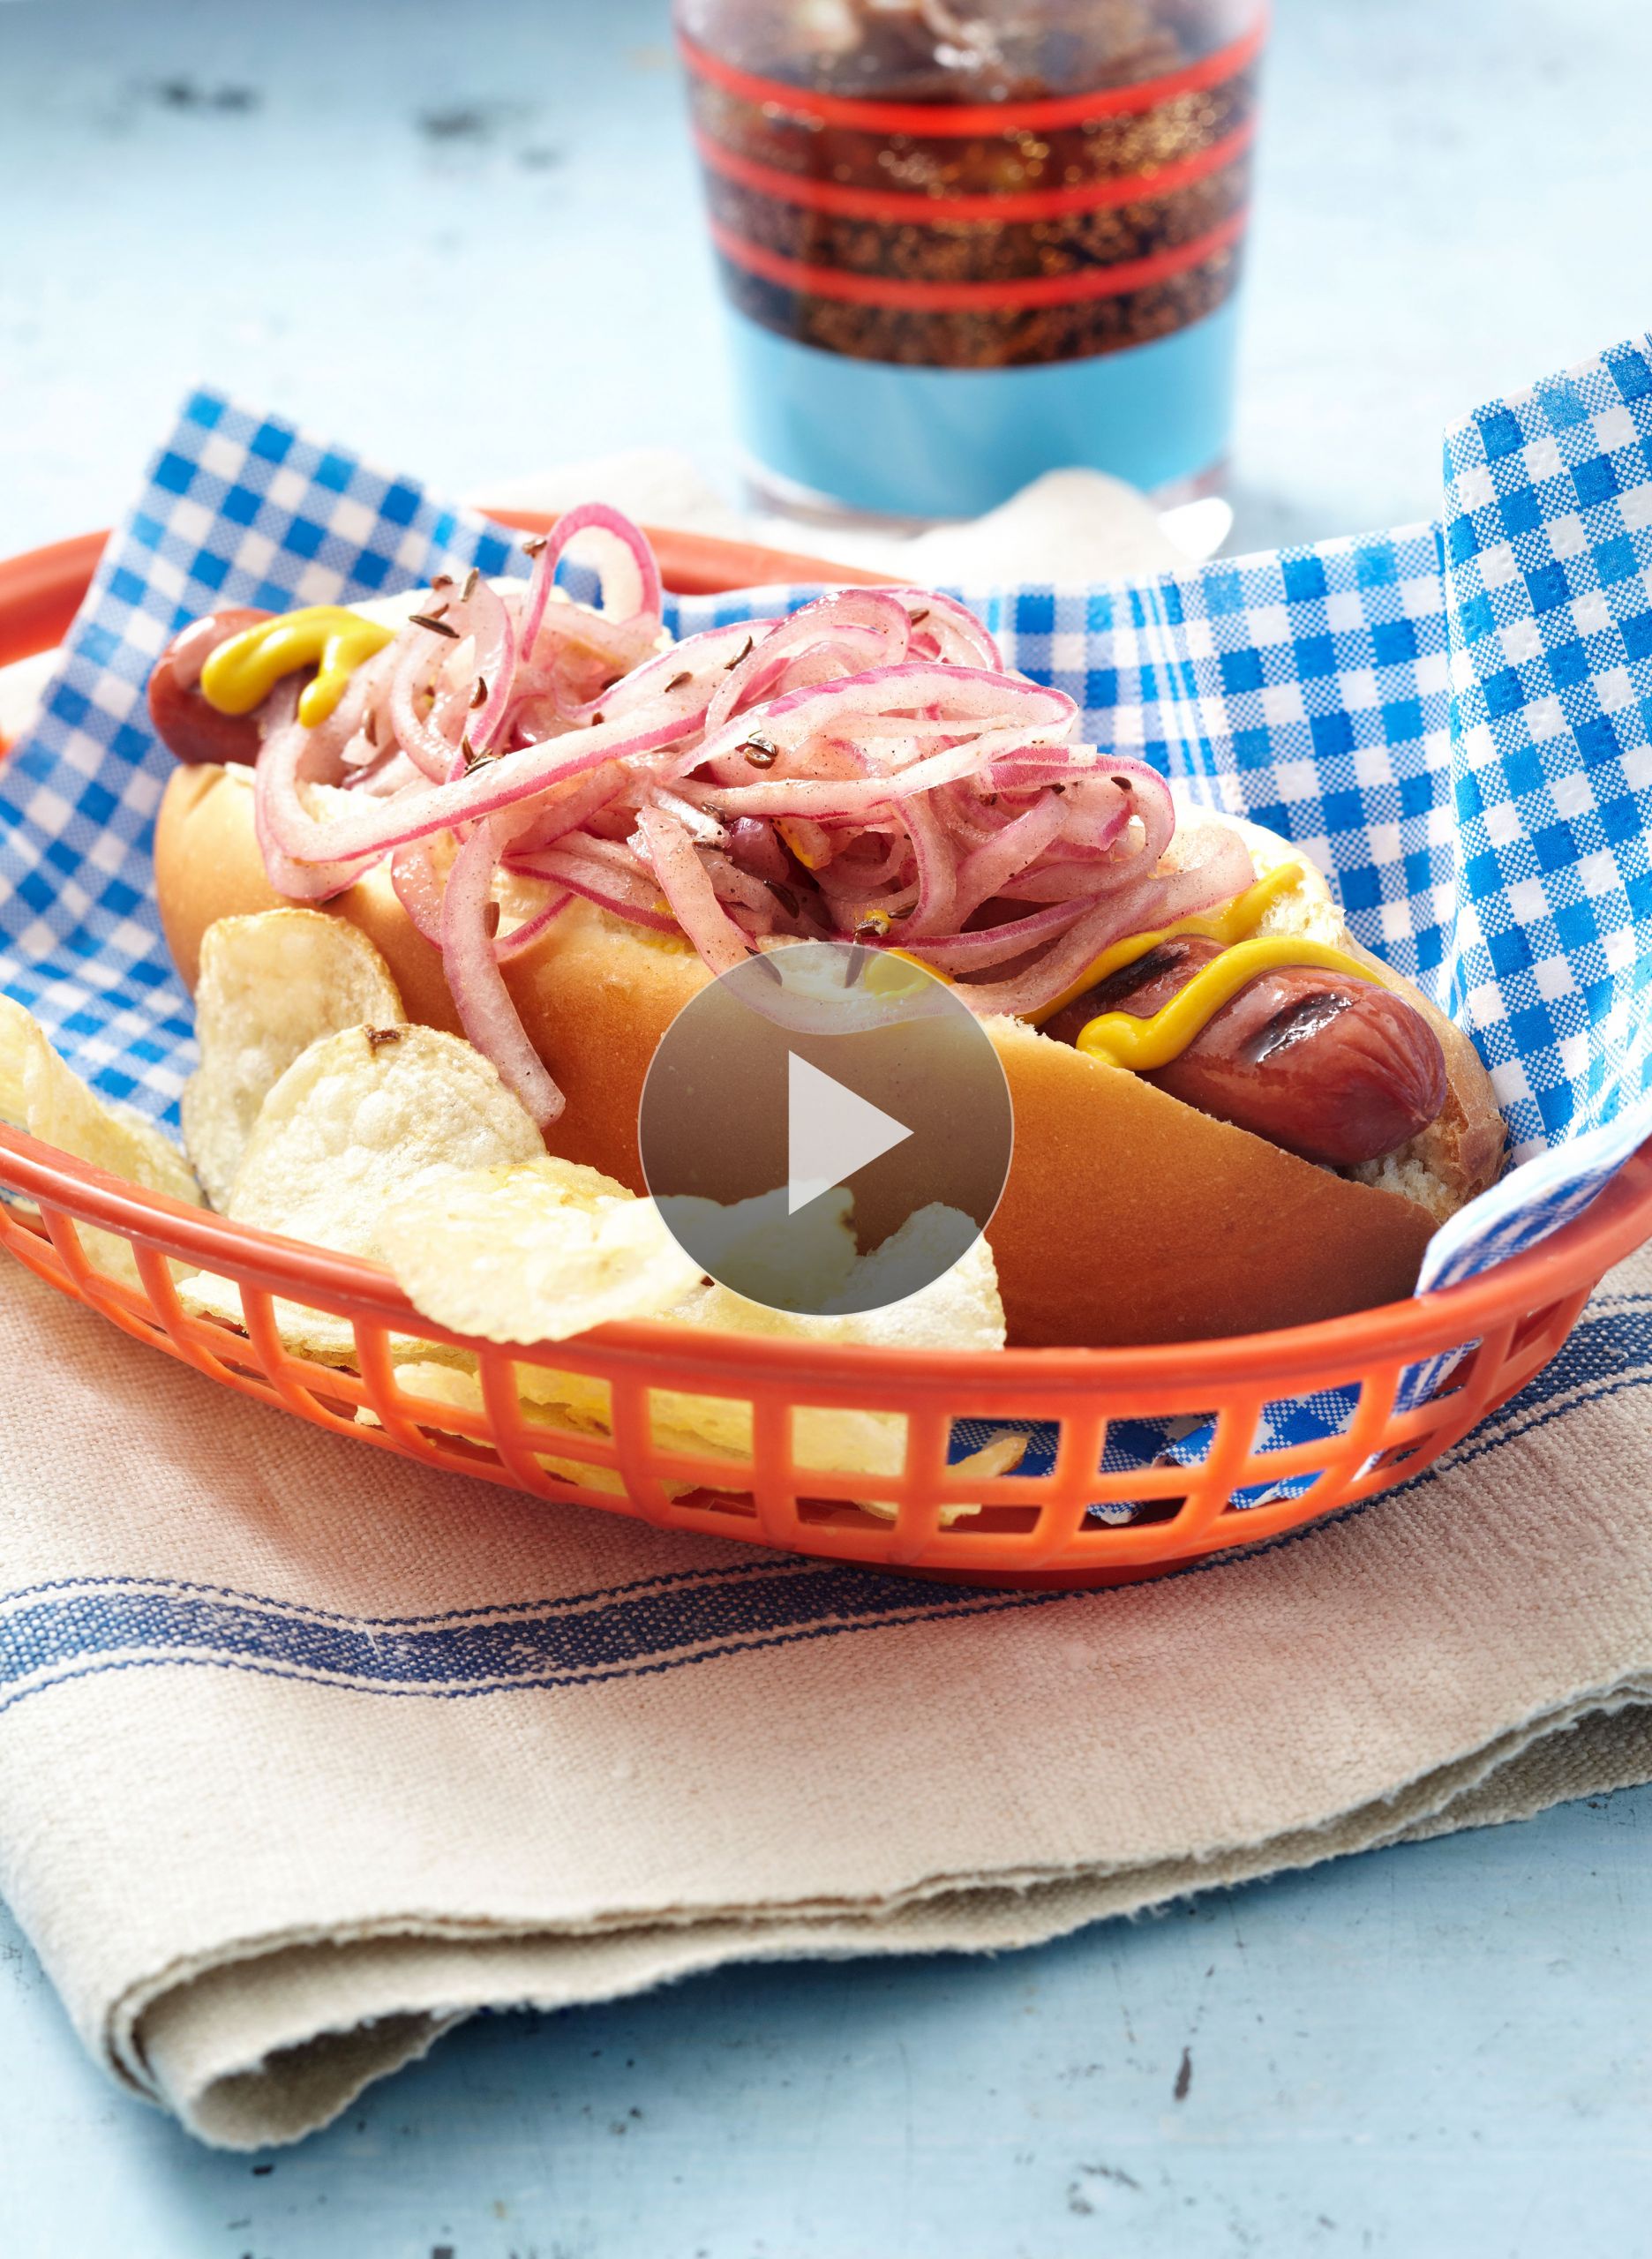 Healthy Hot Dogs
 Should Hot Dogs be Considered Healthy